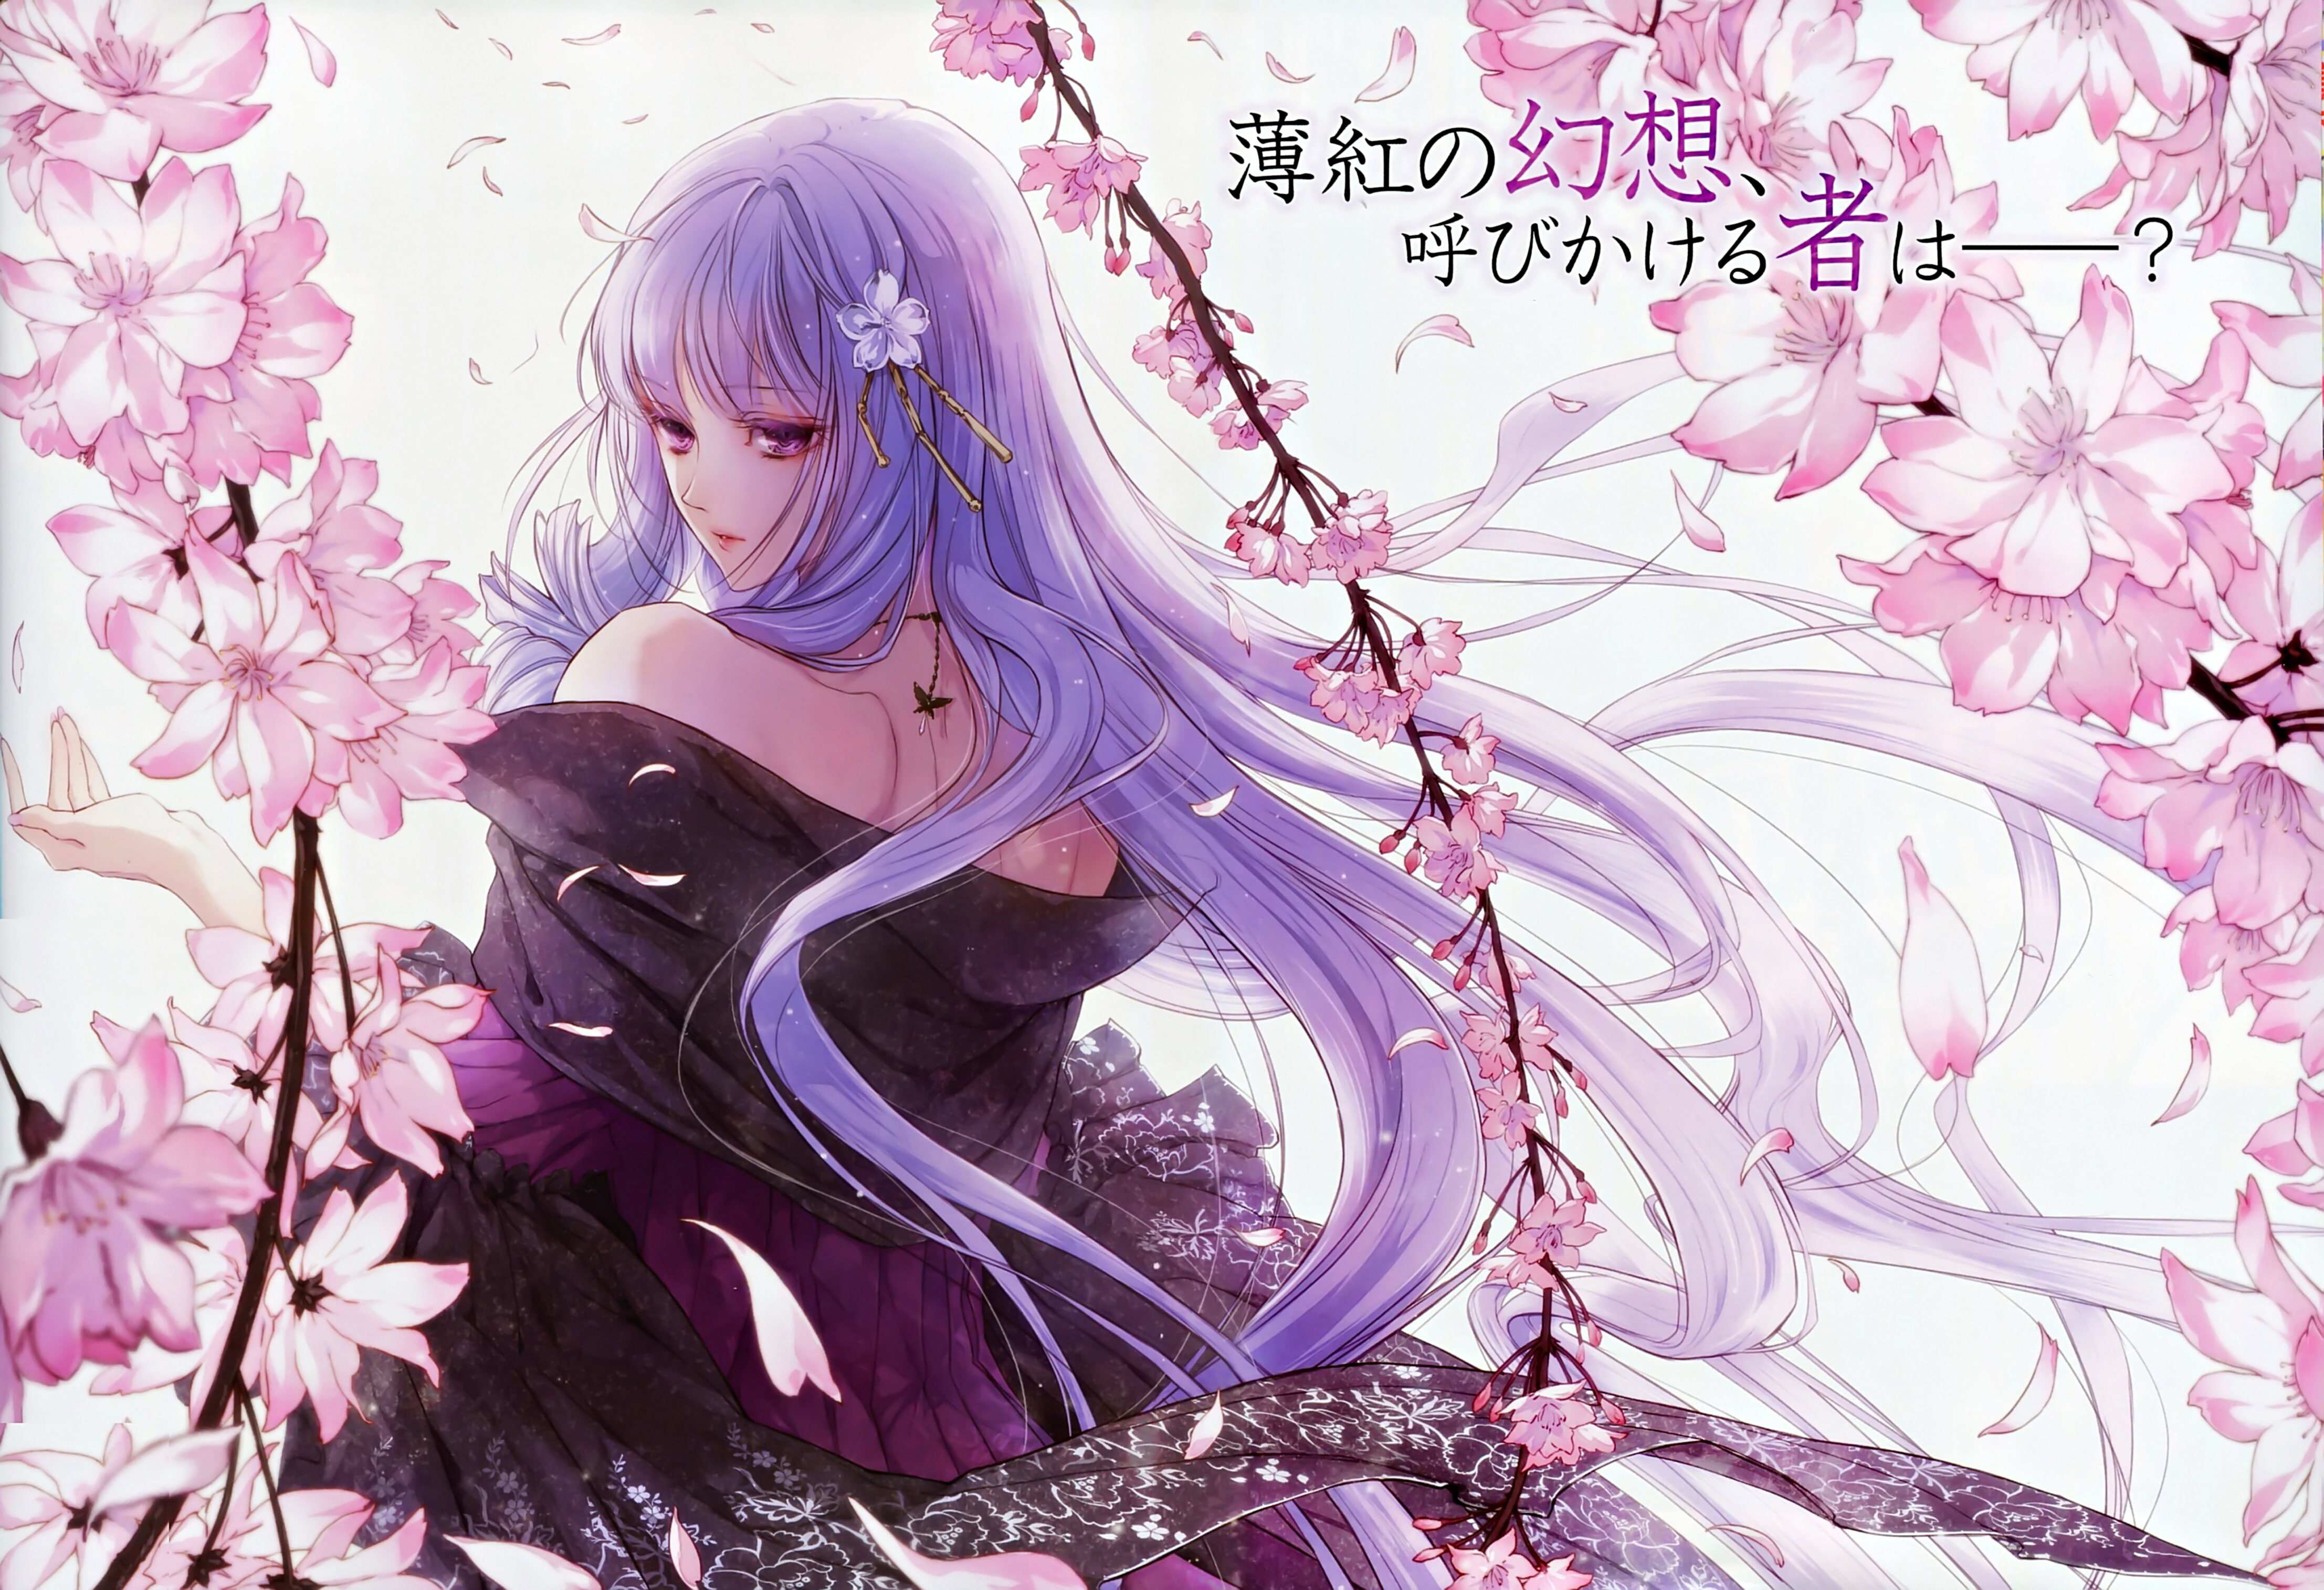 anime, character, des, drama, fleurs, games, girl, gothic, otome